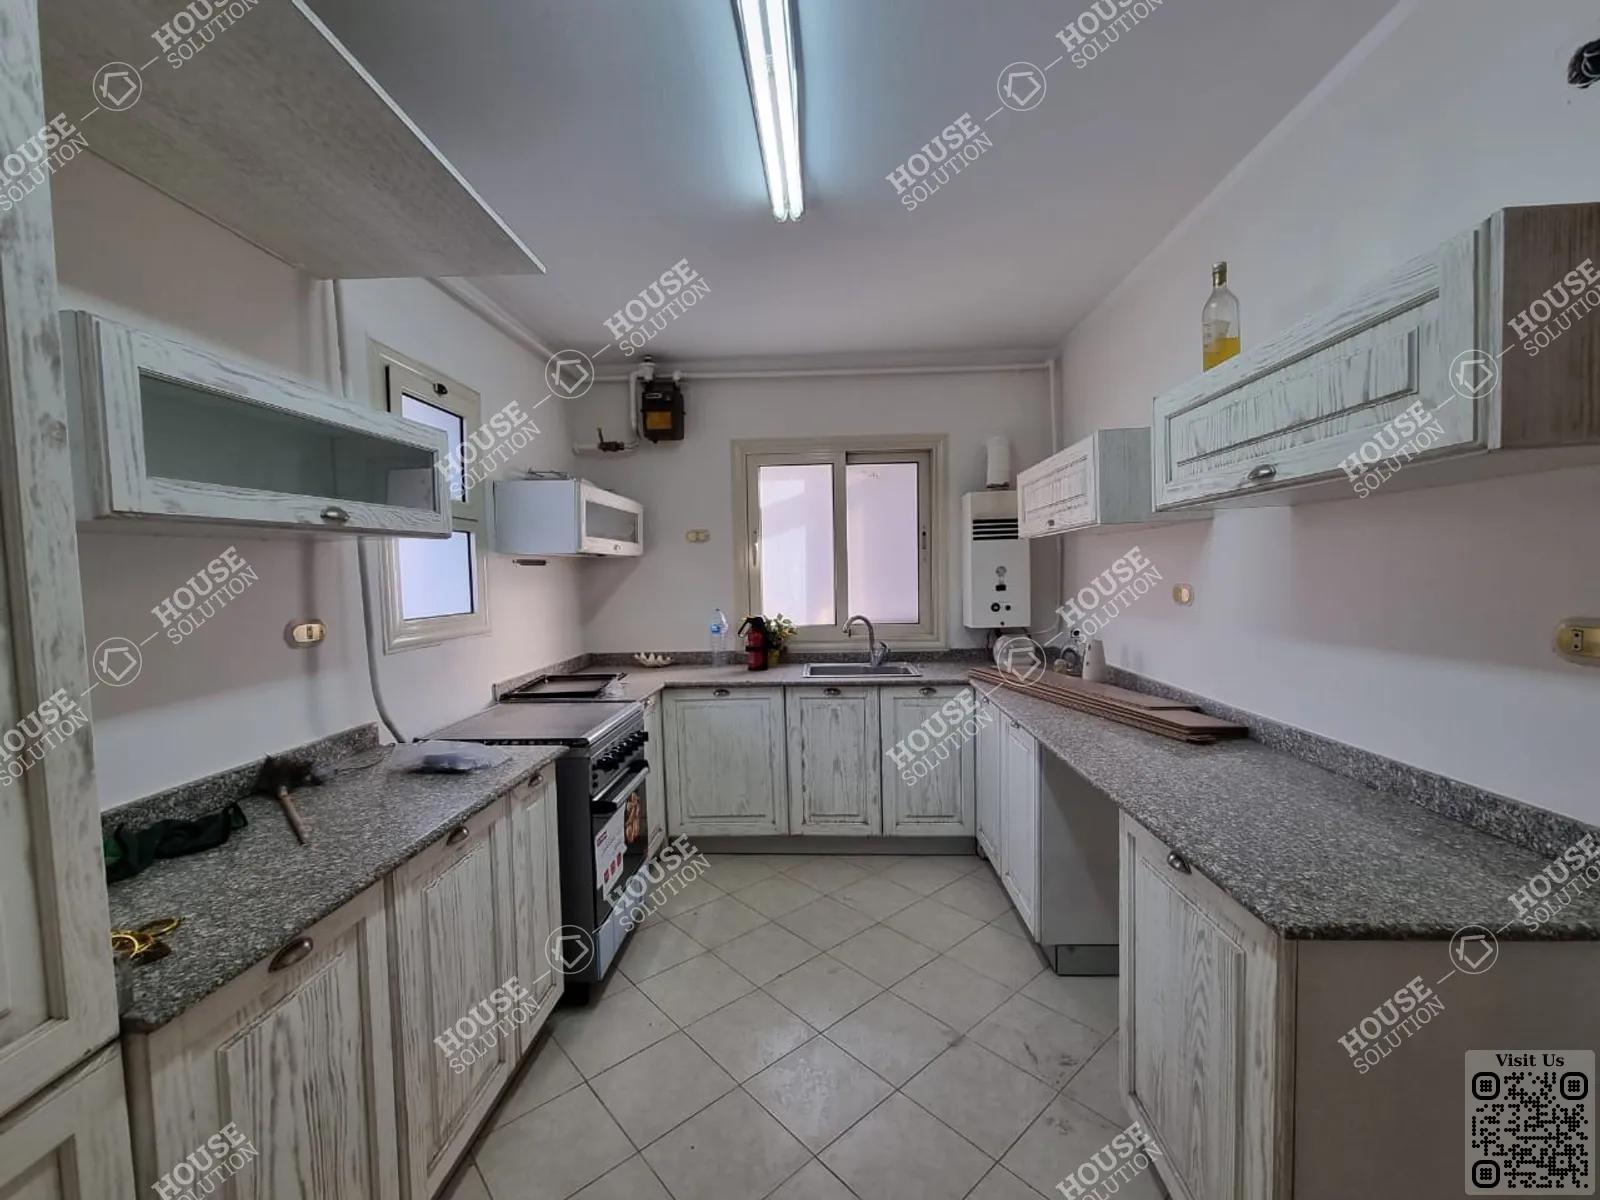 KITCHEN  @ Apartments For Rent In Maadi Maadi Sarayat Area: 160 m² consists of 3 Bedrooms 1 Bathrooms Furnished 5 stars #3864-2